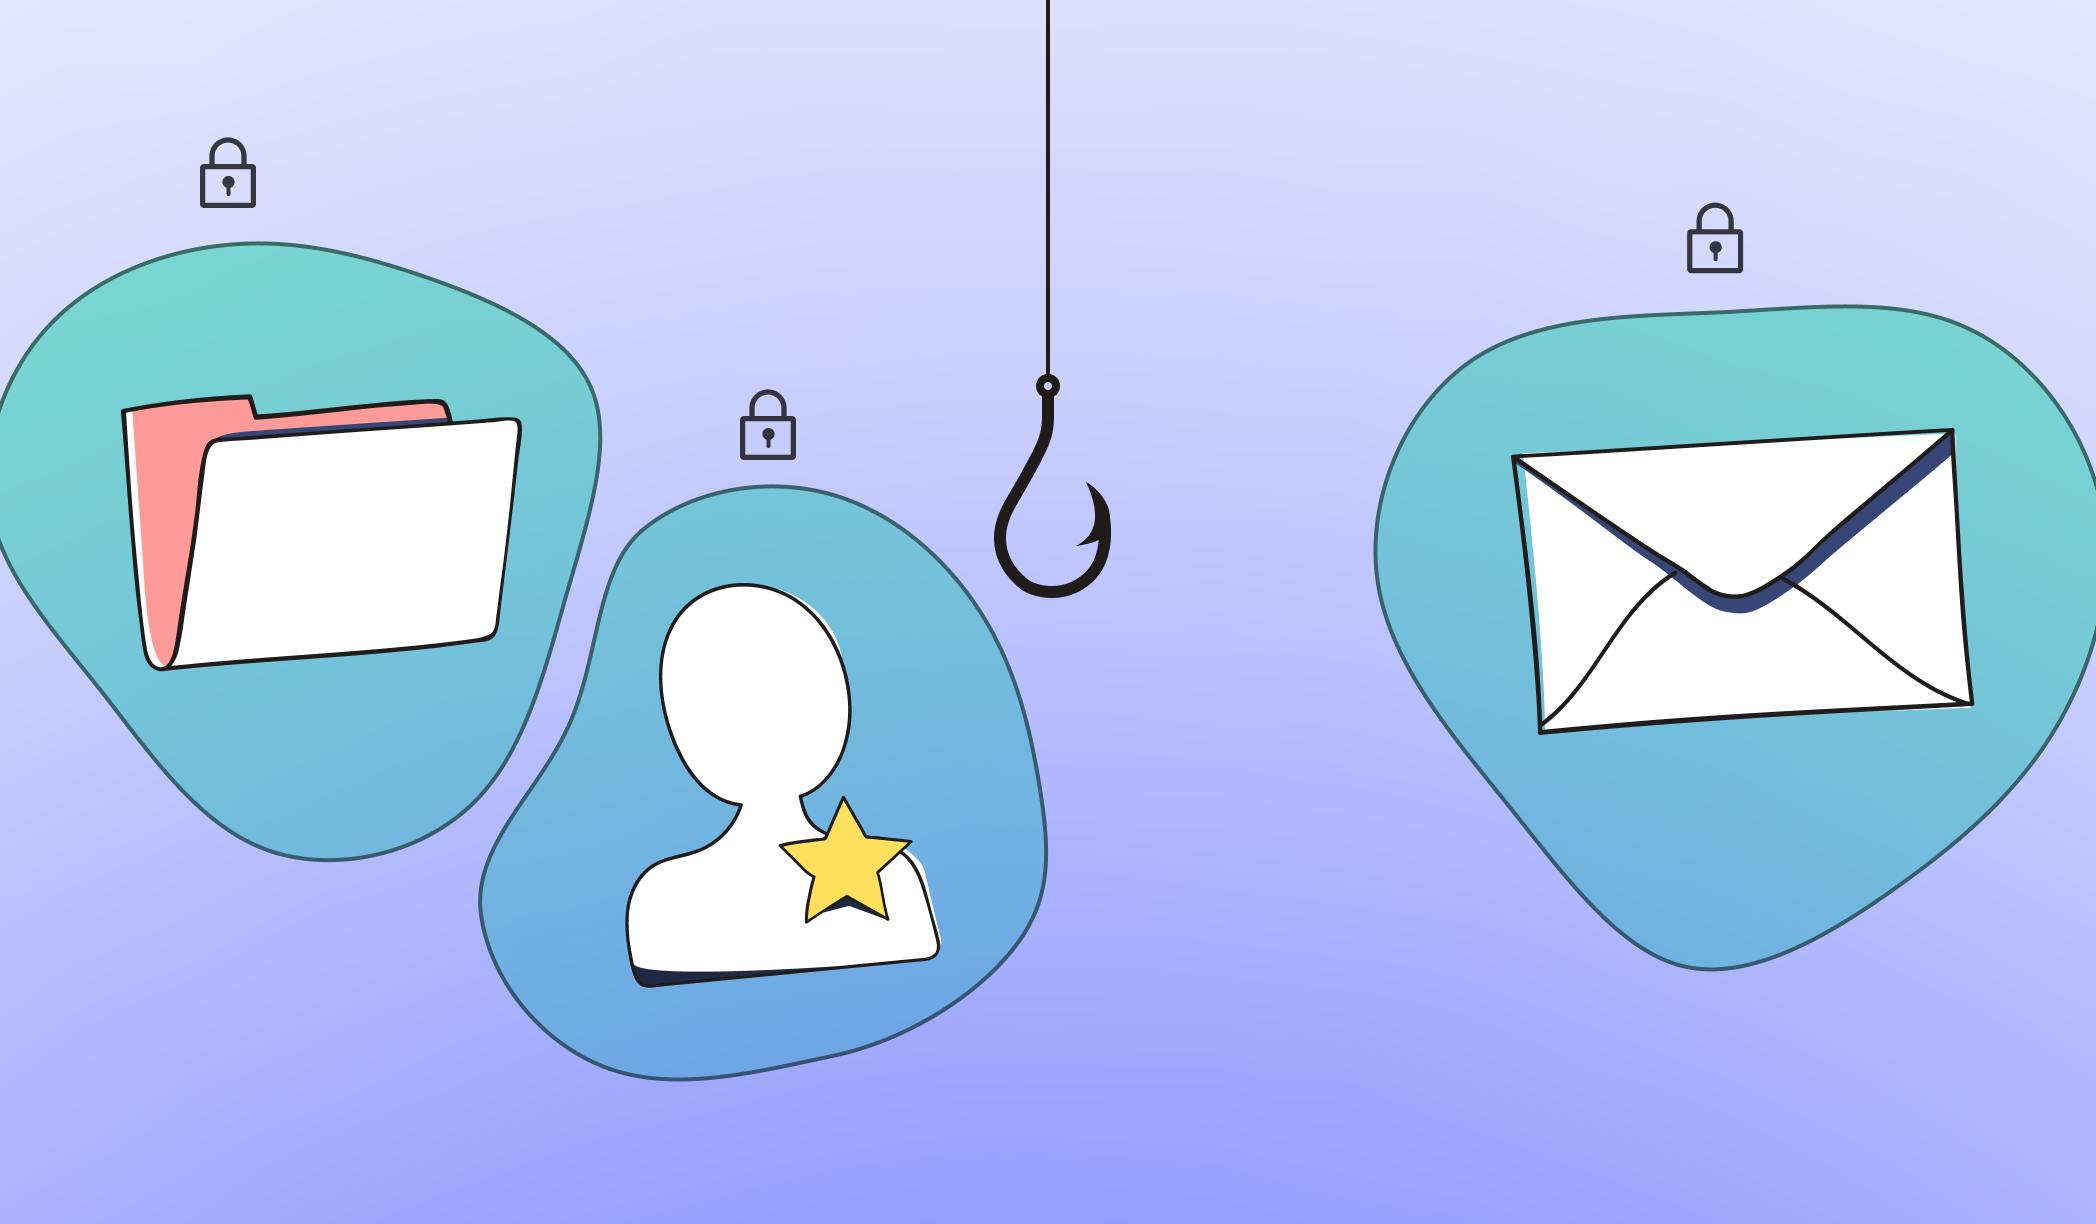 Blogpost illustration of a fishing hook in the centre, surrounded by 3 floating blobs with an illustration of an envelope (email), contacts and folders all secured and locked by StartMail so the hook can't catch them.